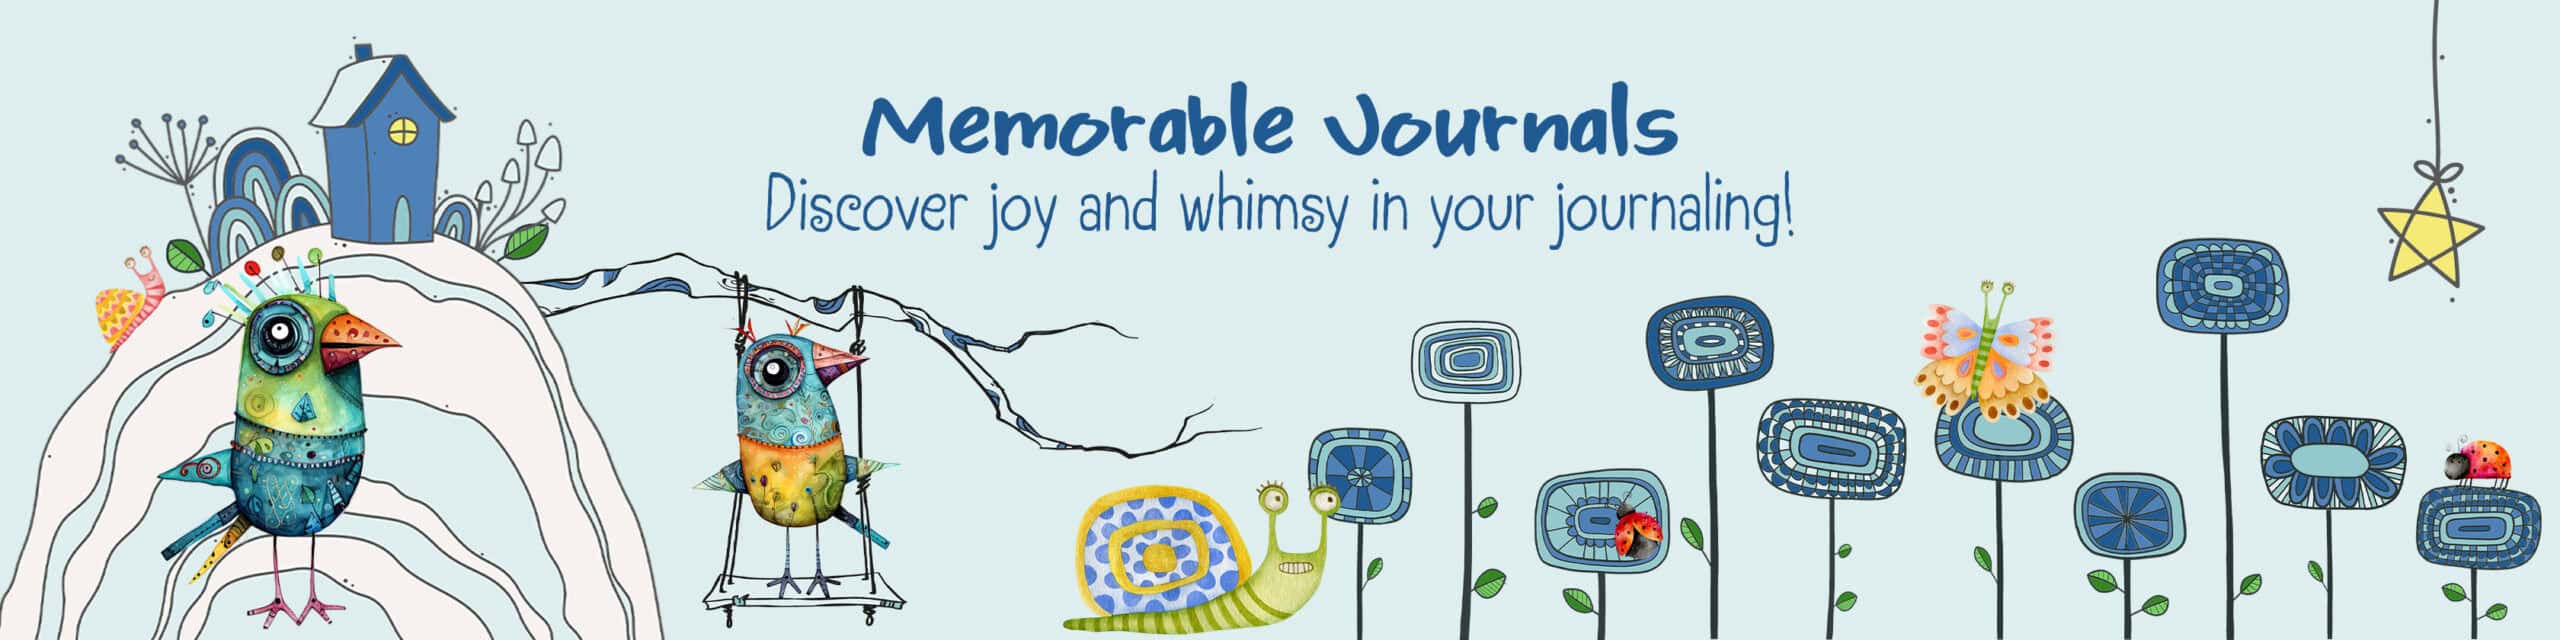 Discover joy and whimsy in your journaling!